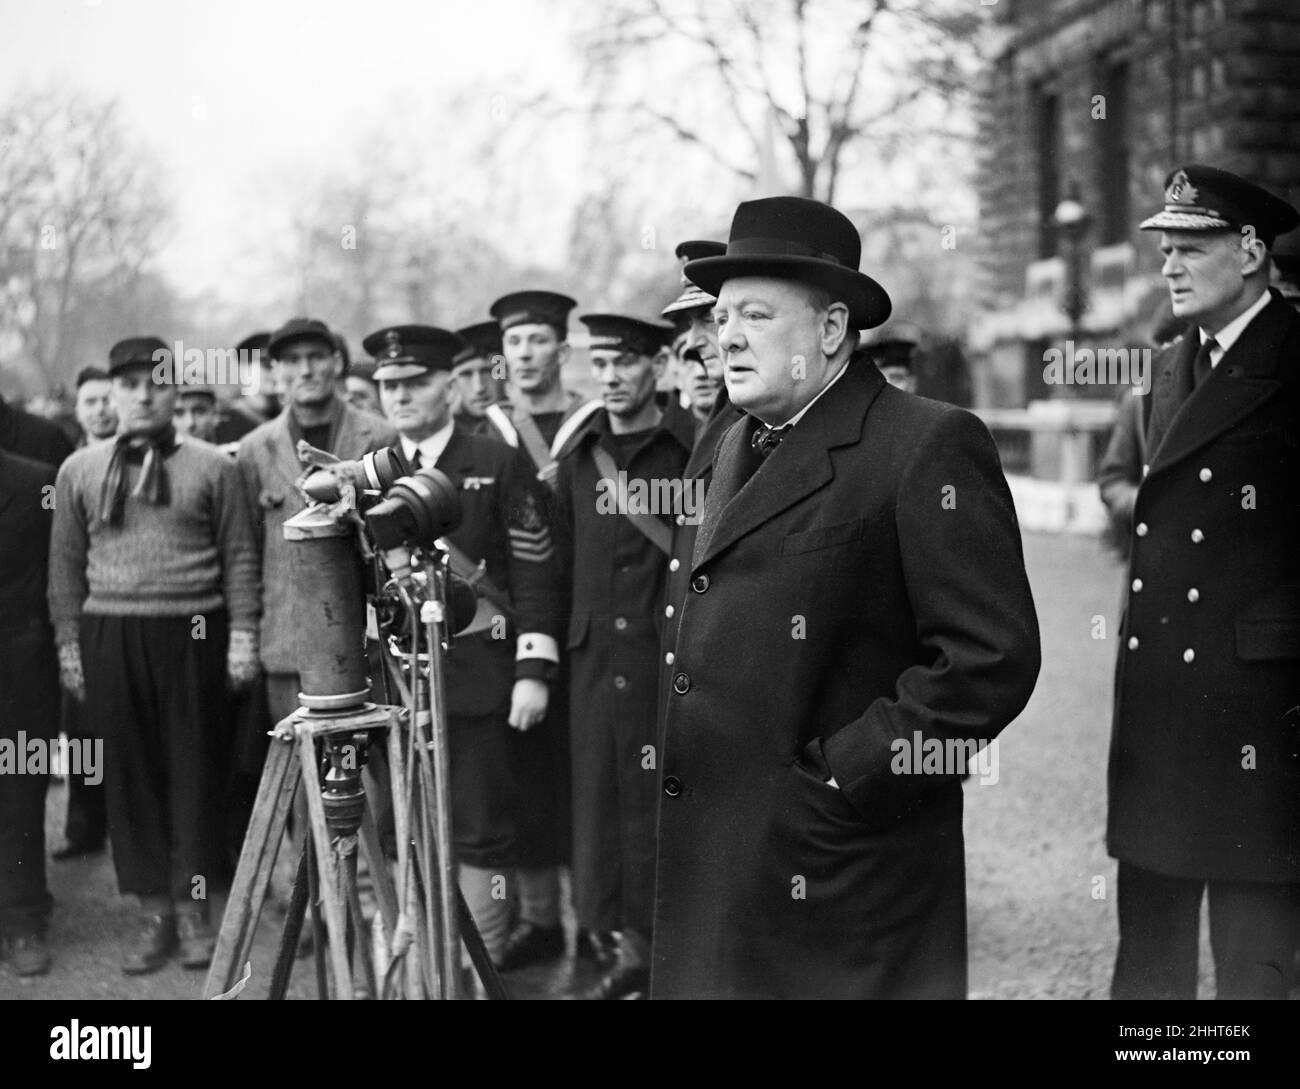 First Lord of the Admiralty Winston Churchill inspecting sailors from HMS Hardy on Horse Guards Parade in Central London during the Second World War.19th April 1940. Stock Photo